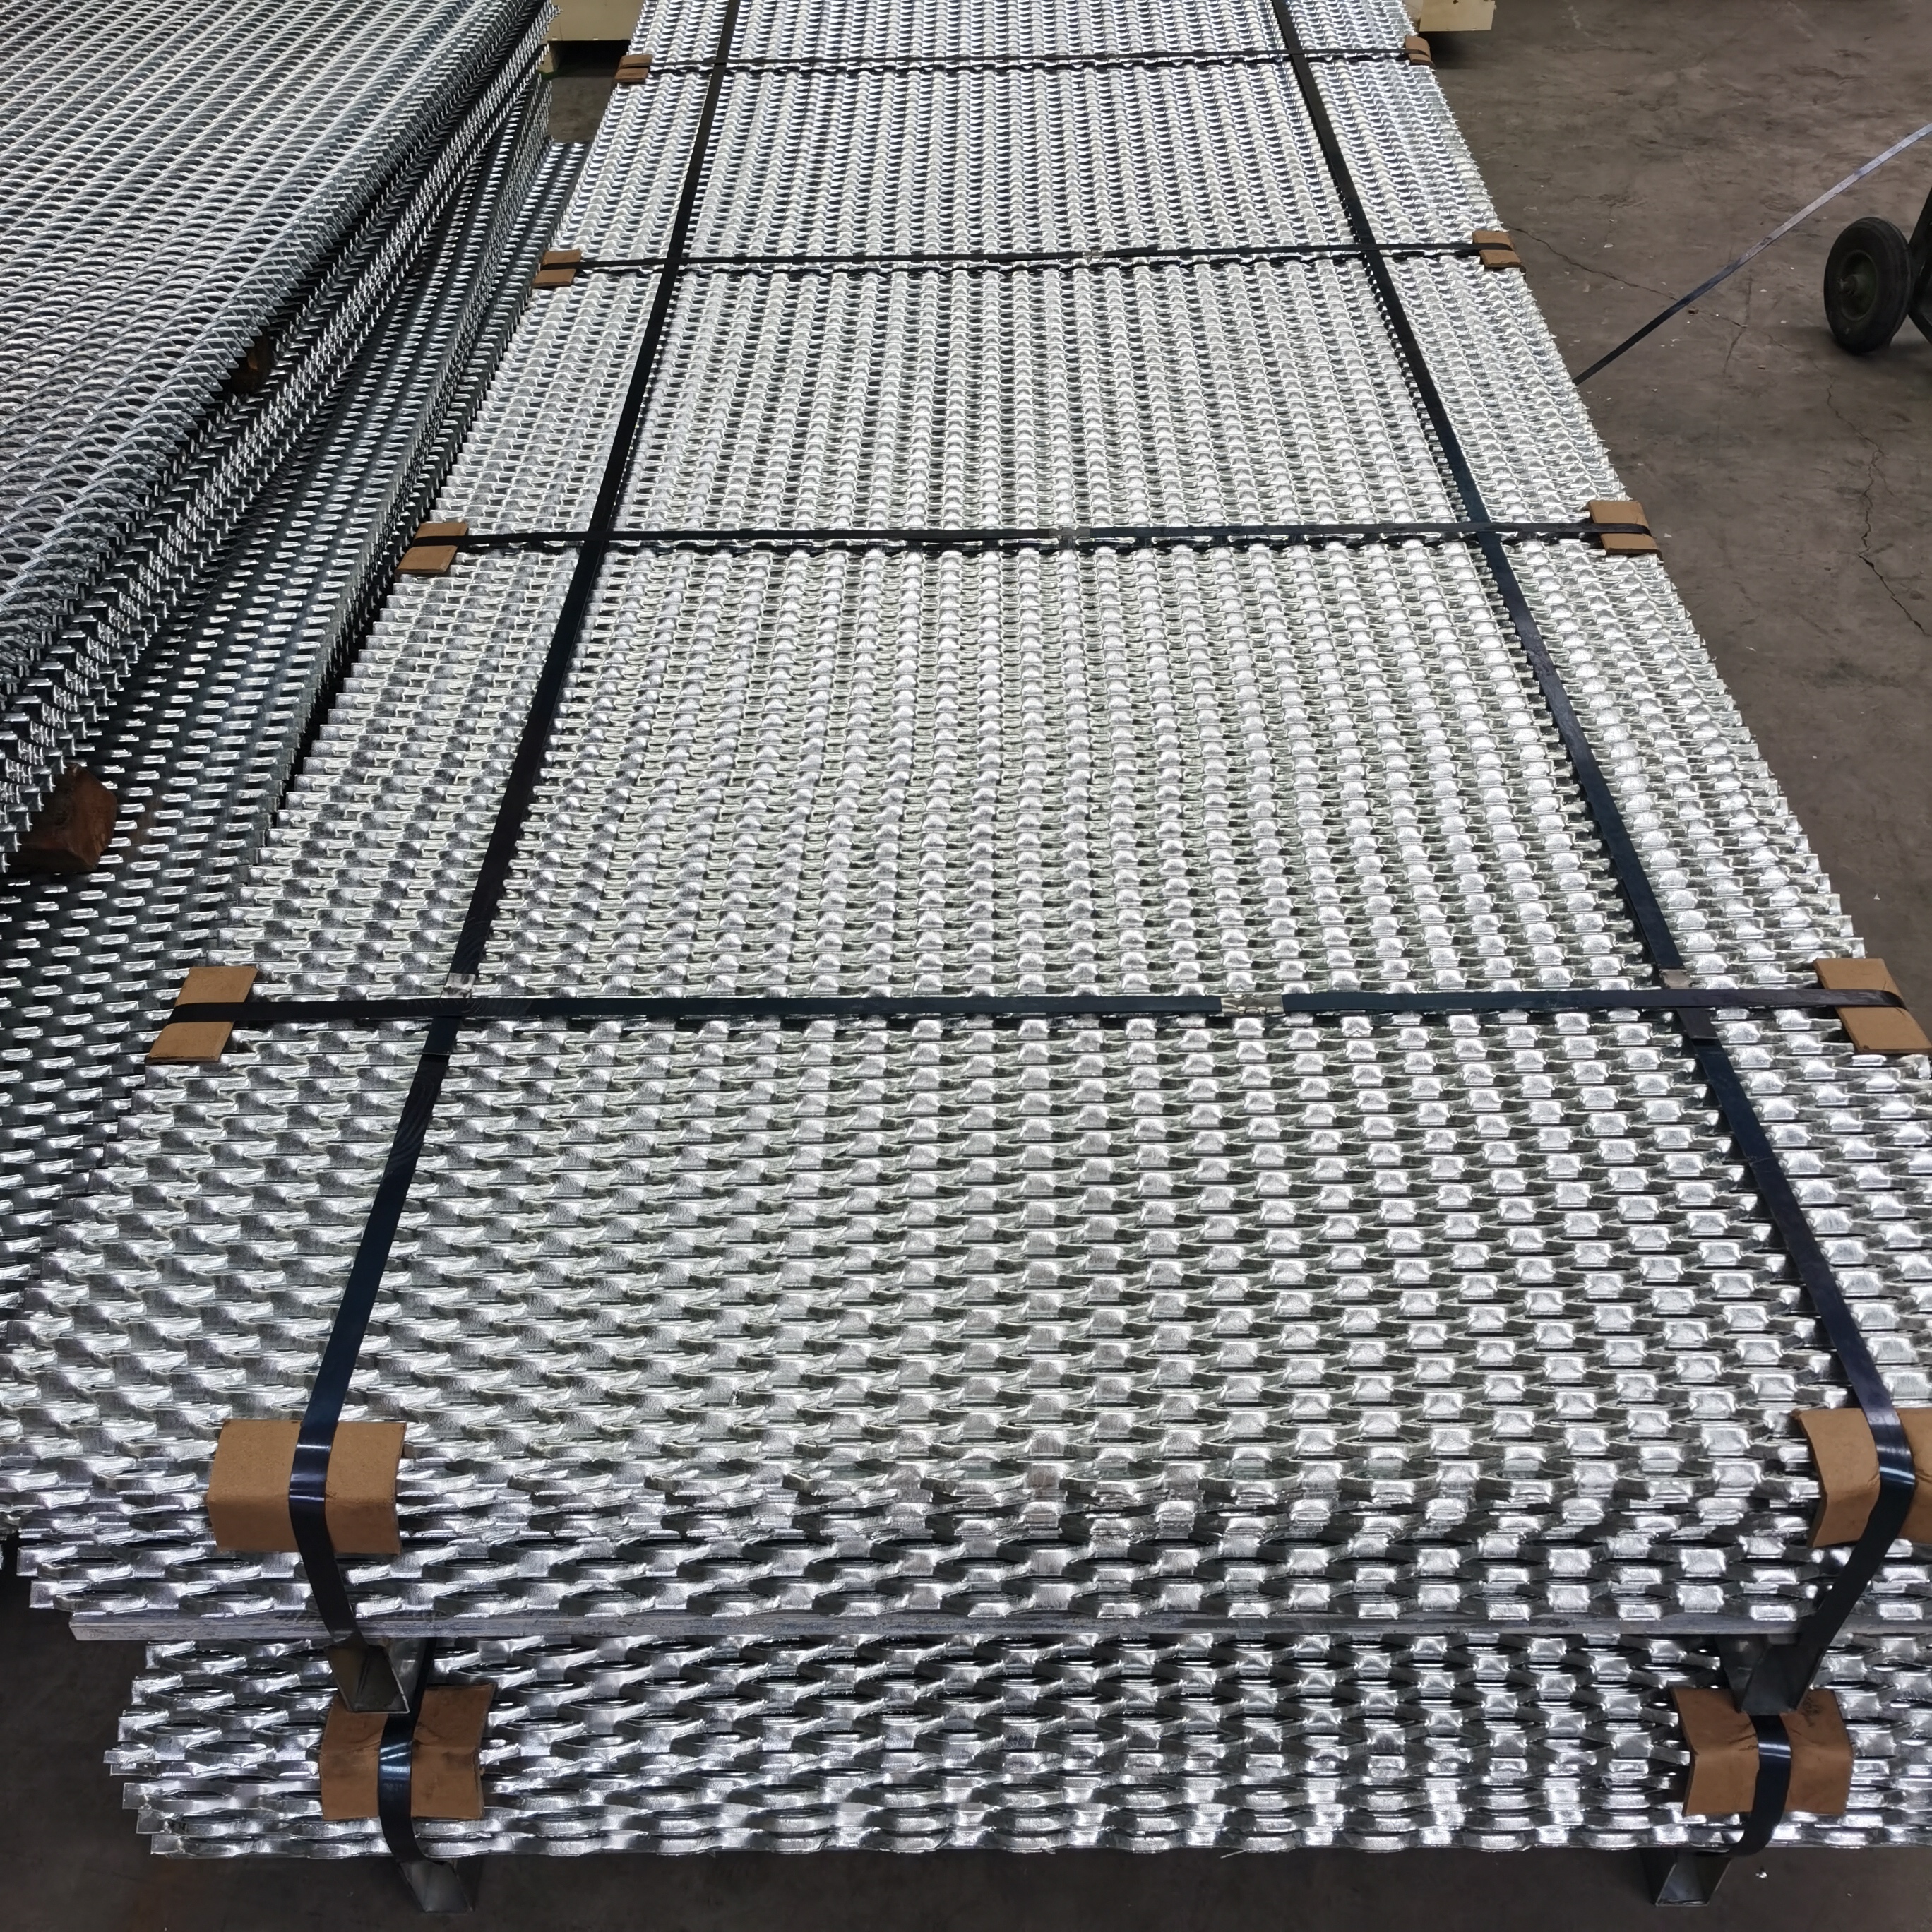 Expanded Metal Mesh Sizes